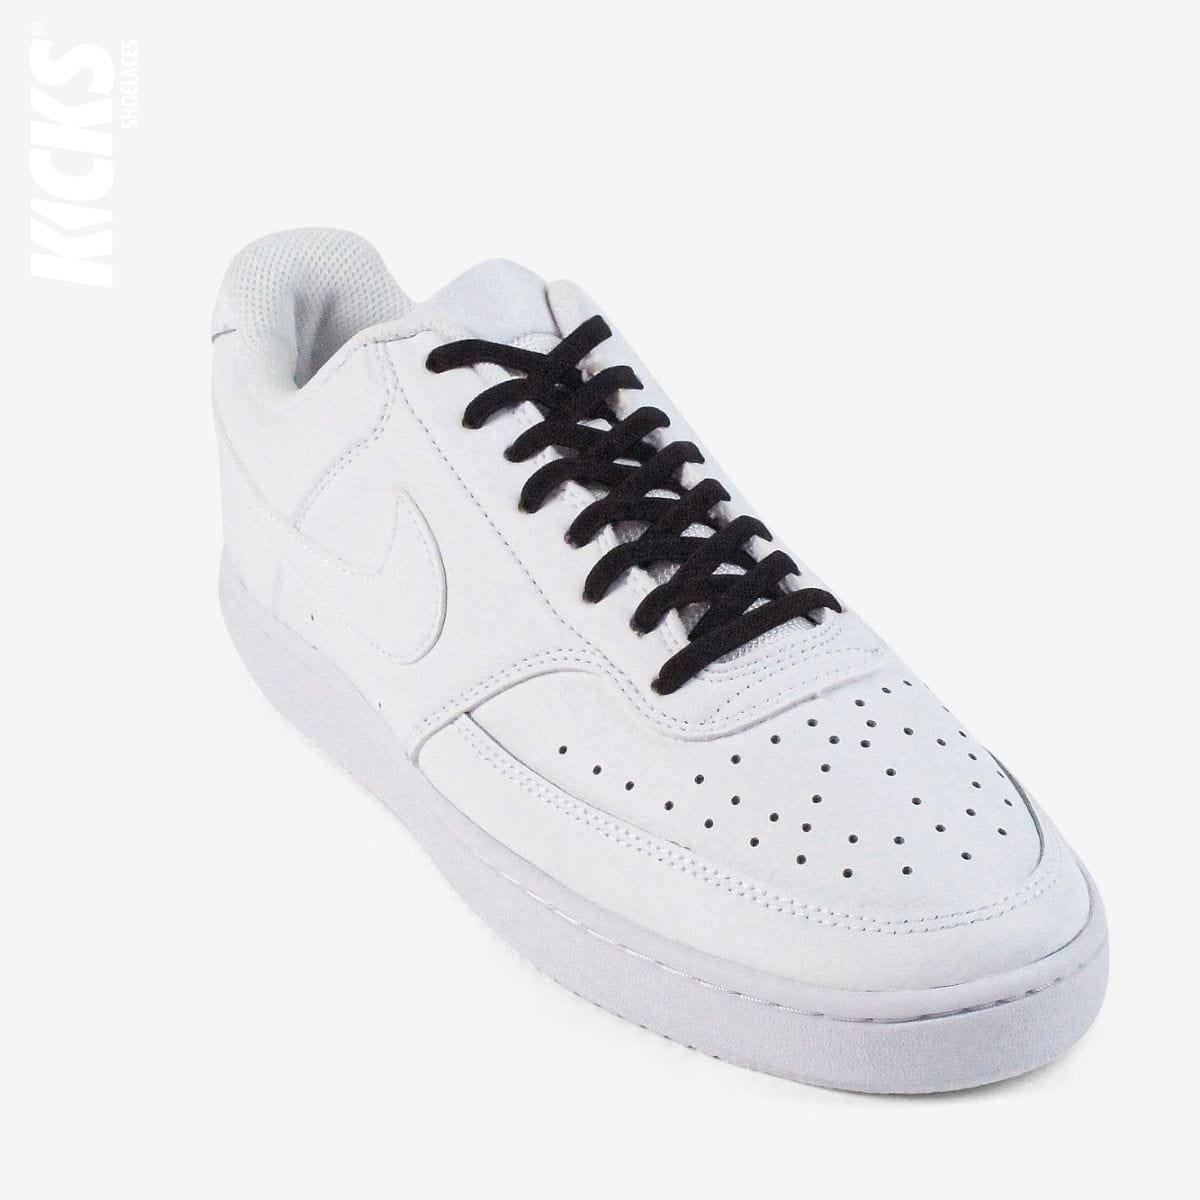 no-tie-shoelaces-with-black-laces-on-nike-white-sneakers-by-kicks-shoelaces